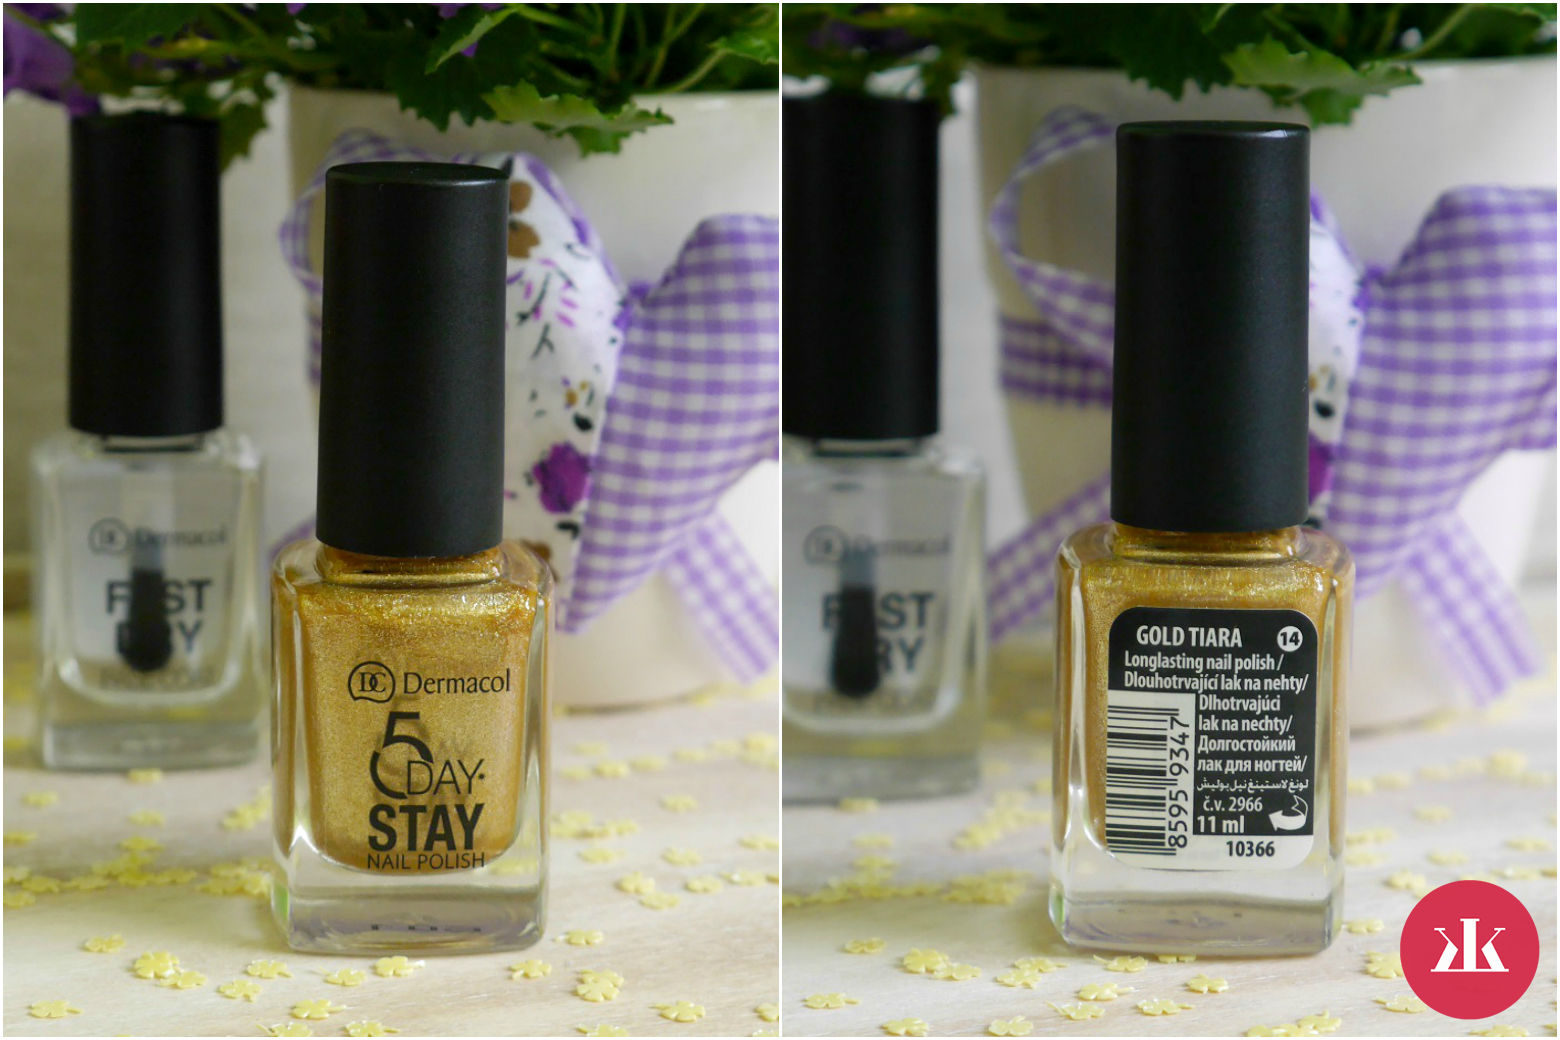 Dermacol 5 Day Stay Longlasting nail polish & Fast Dry Base Coat